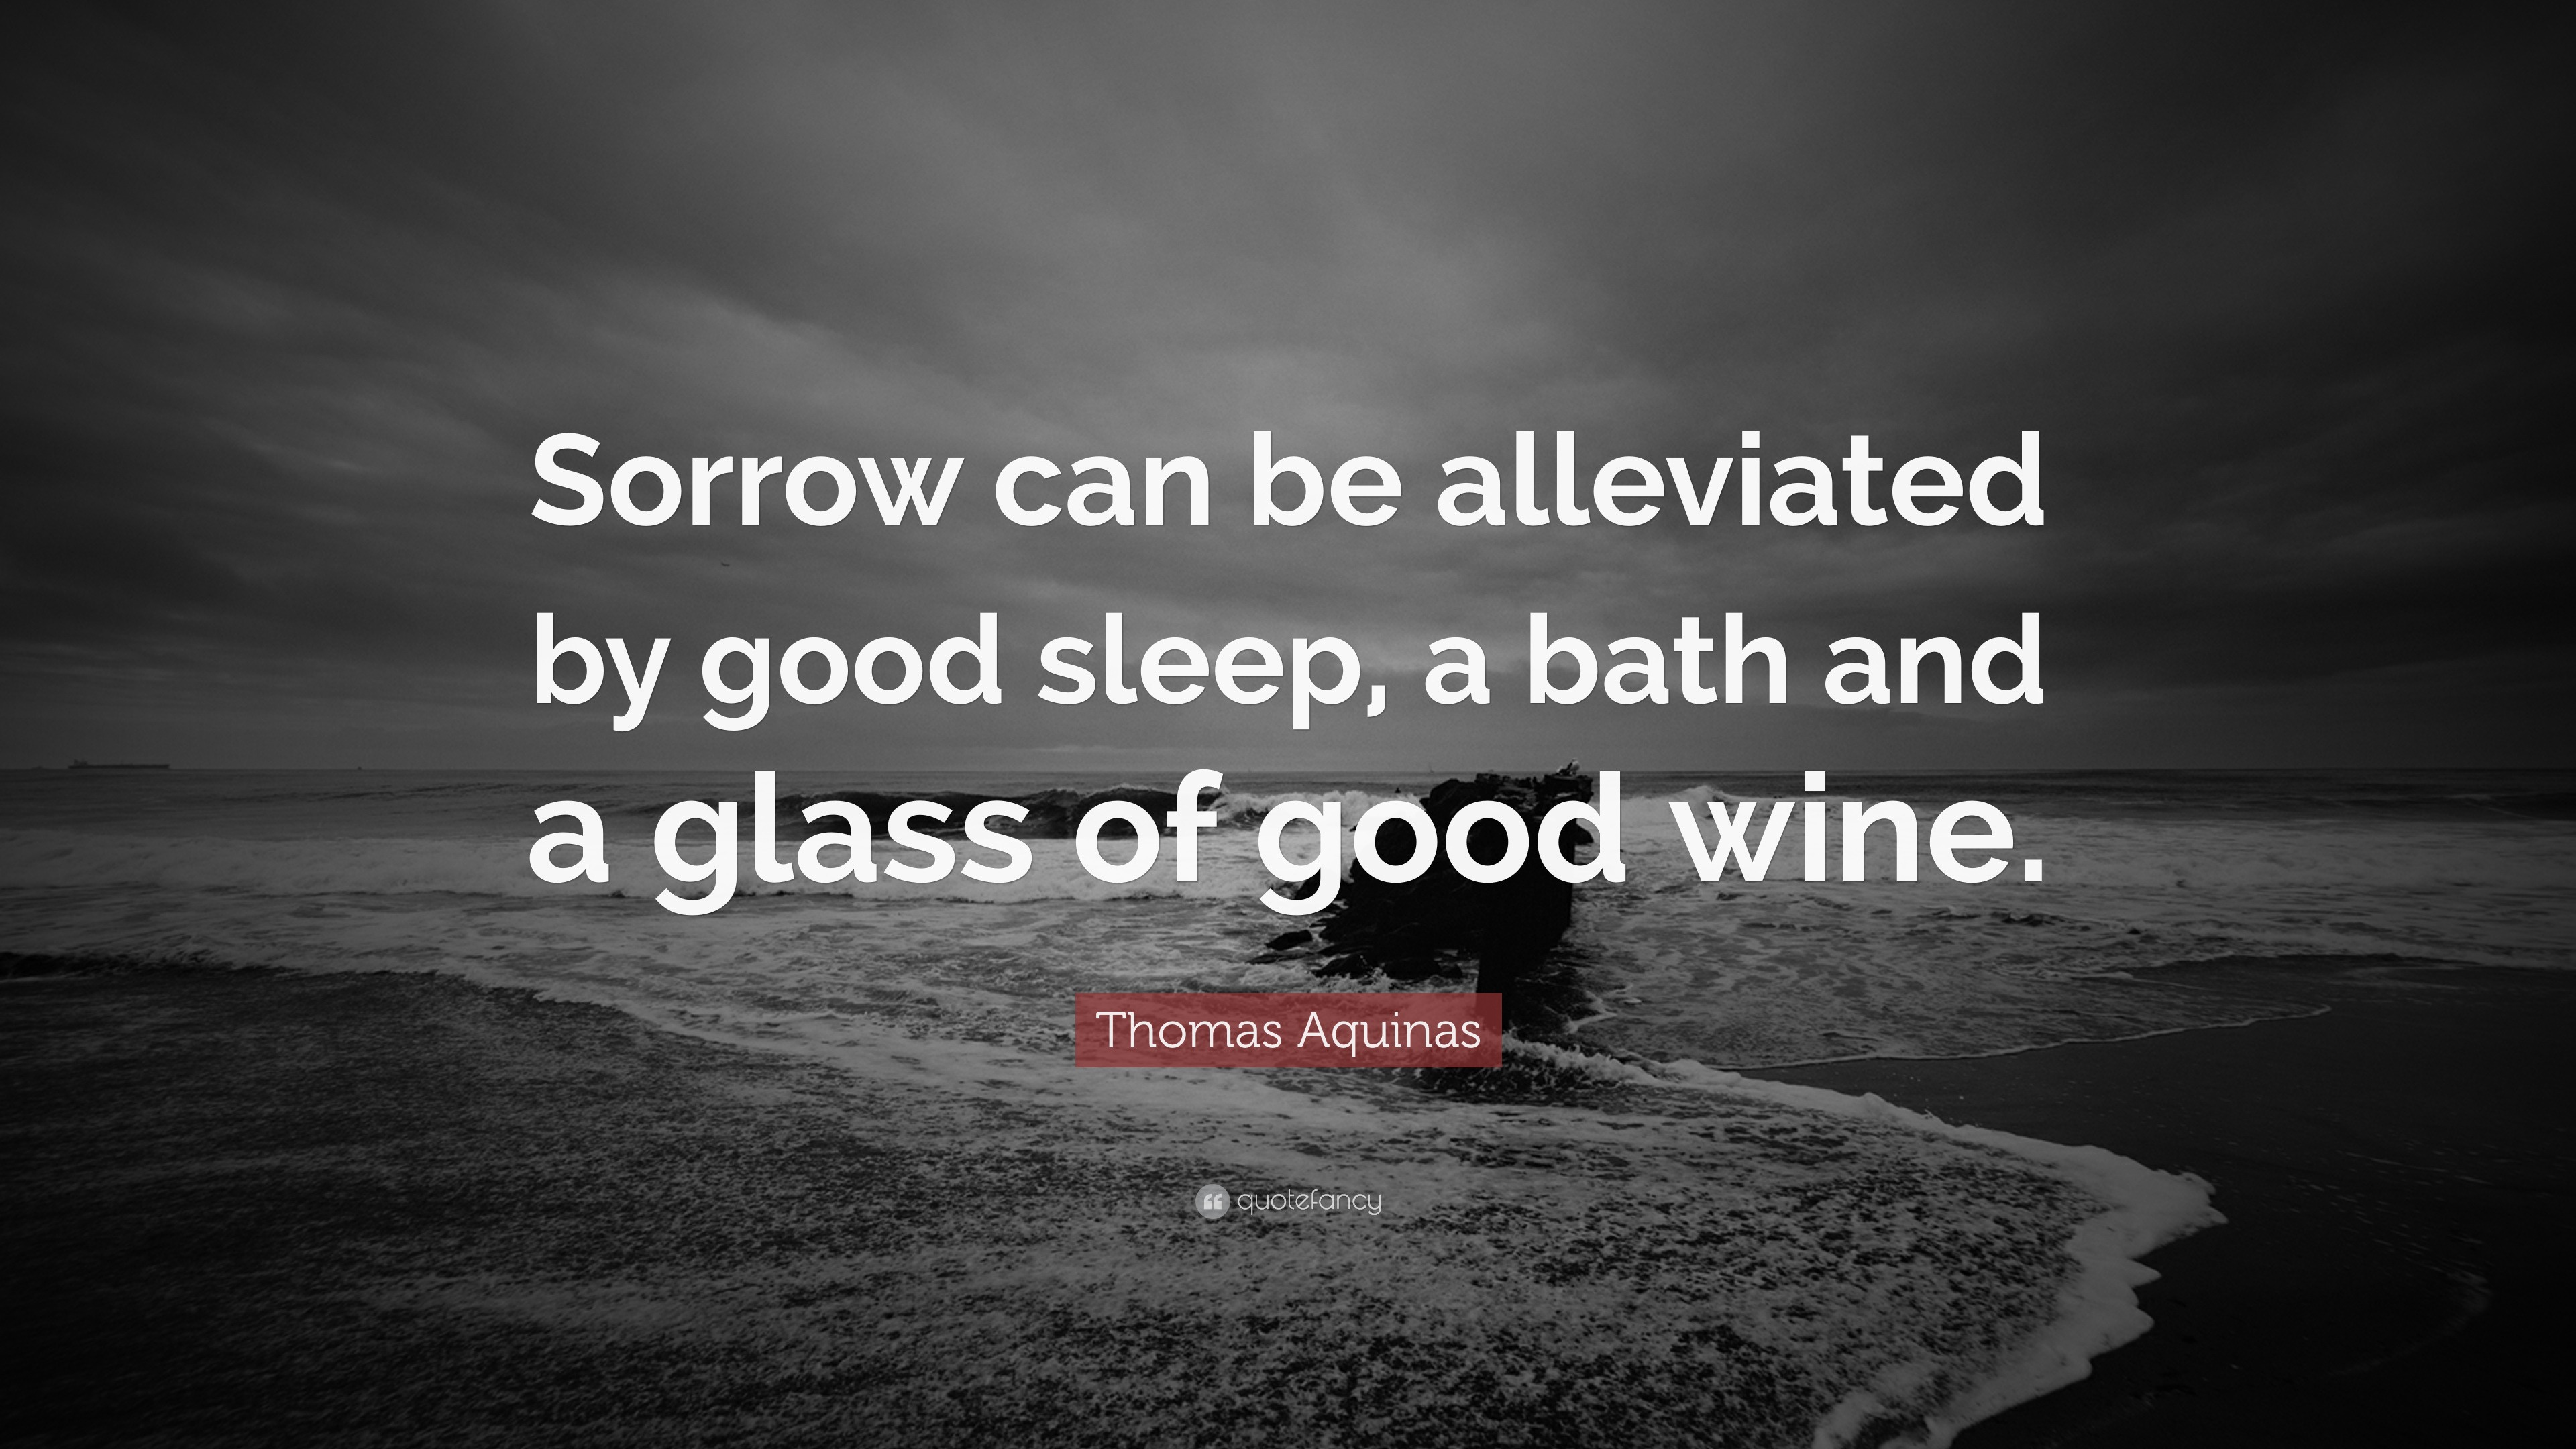 Sorrow can be alleviated by good sleep, a bath and a glass of good wine. 